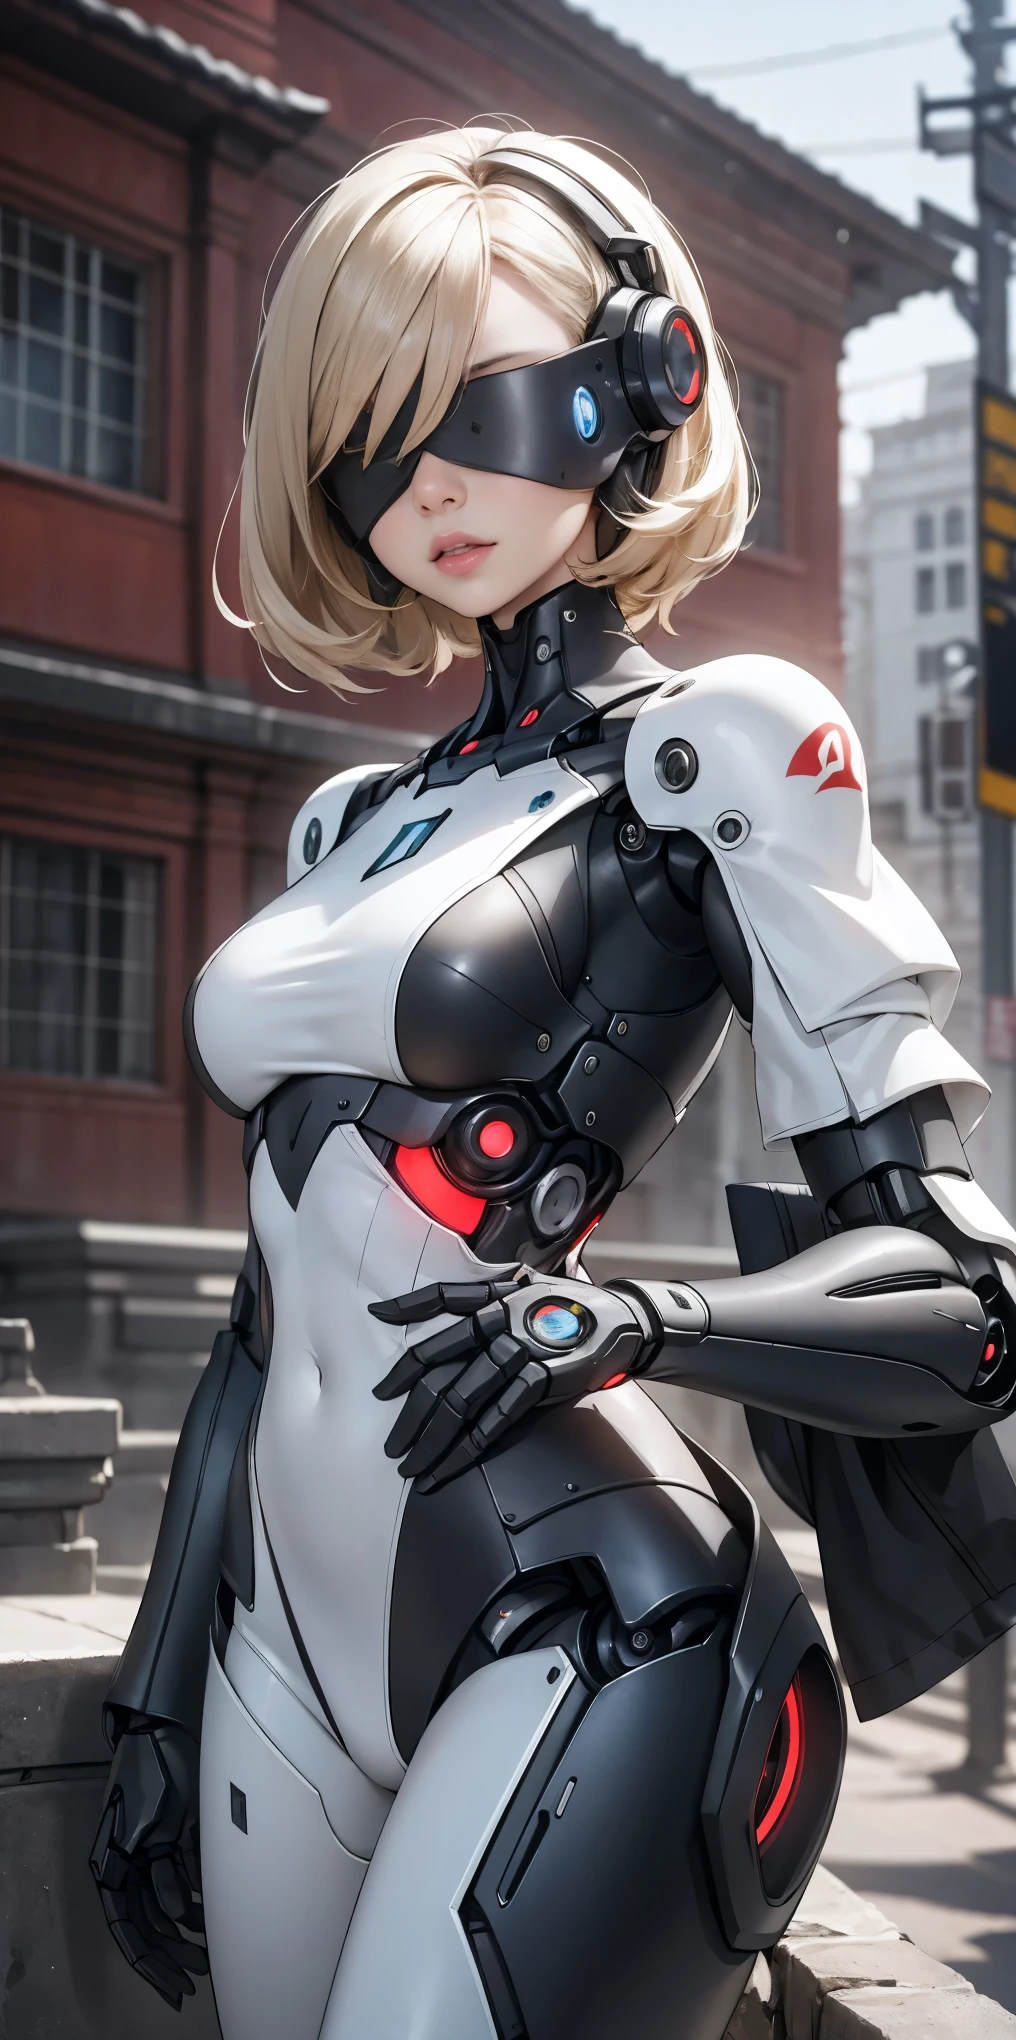 There is a woman in a robot suit posing next to an ancient building, Beautiful white girl half cyborg, Cute cyborg girl, Beautiful girl cyborg, Perfect Robot Girl, Cyborg girl, Young cyborg grady, Beautiful Female Robot, Beautiful robot woman, cyborg girl, perfect cyborg female, porcelain cyborg, Female robot, Beautiful cyborg images